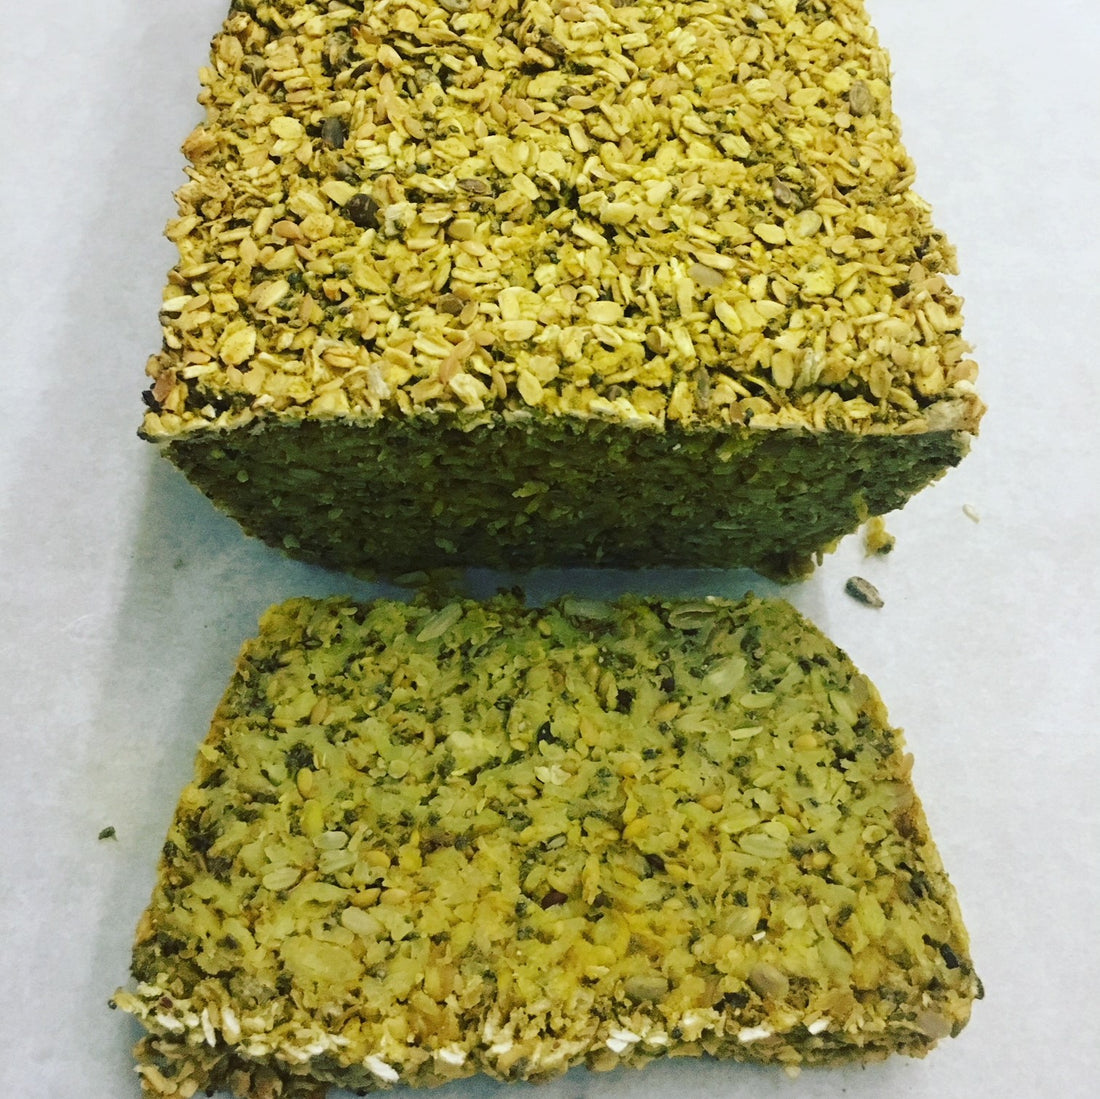 The Conscientious Cook's Turmeric & Seed Loaf